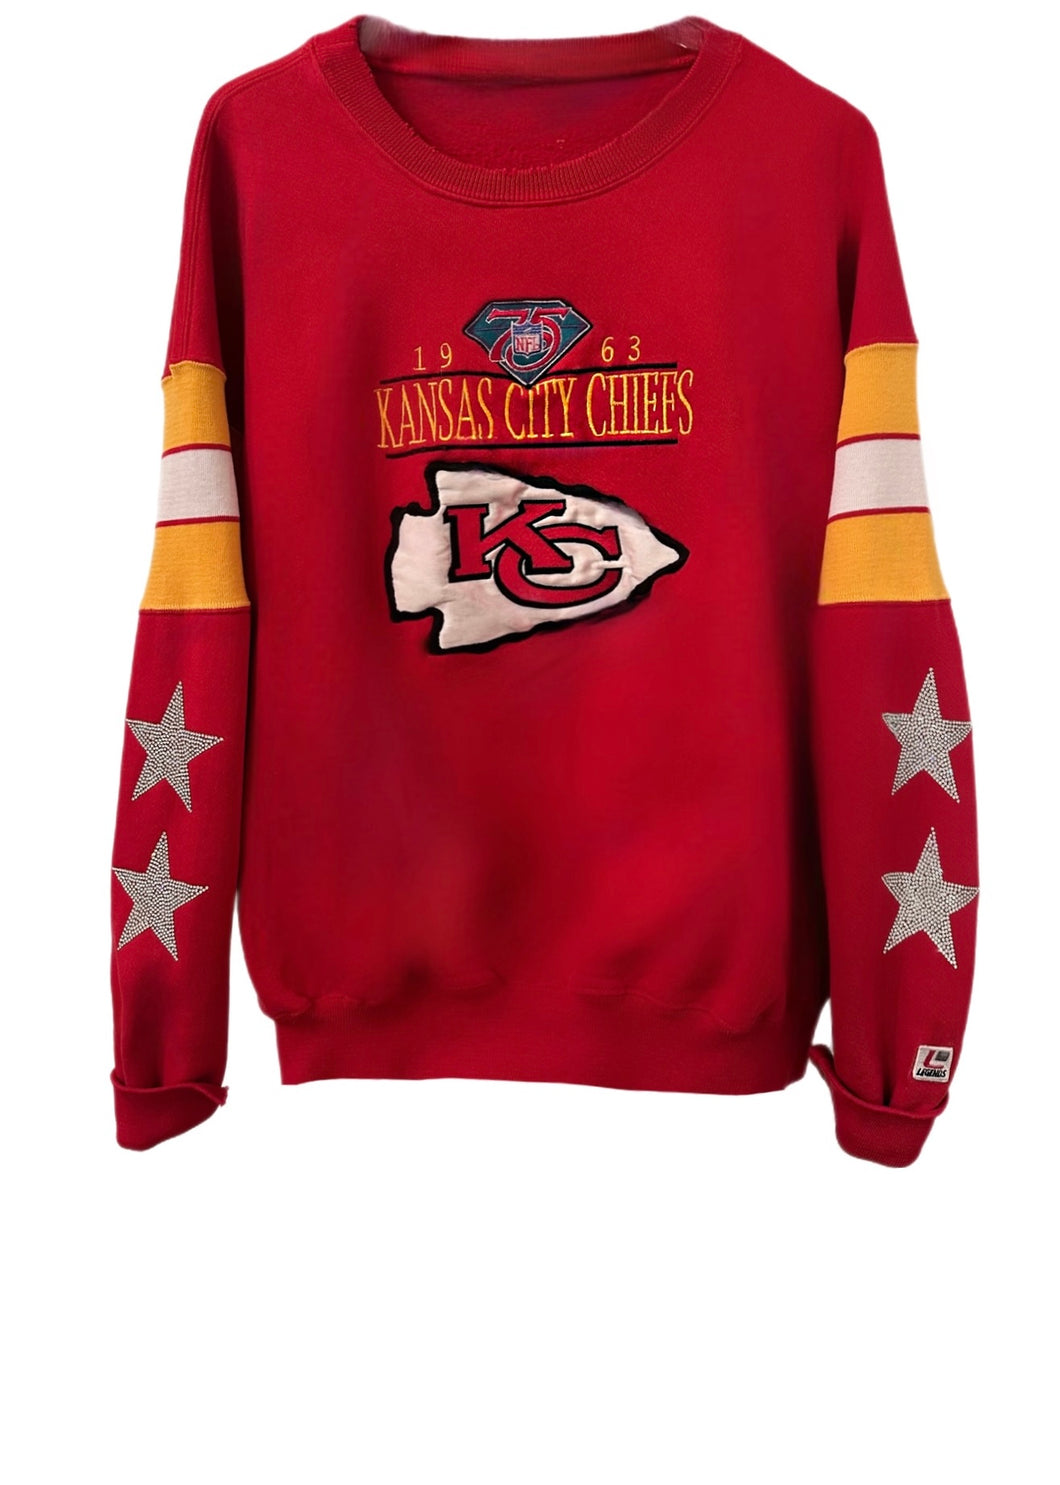 Kansas City Chiefs, NFL One of a KIND Vintage Sweatshirt with Crystal Star Design